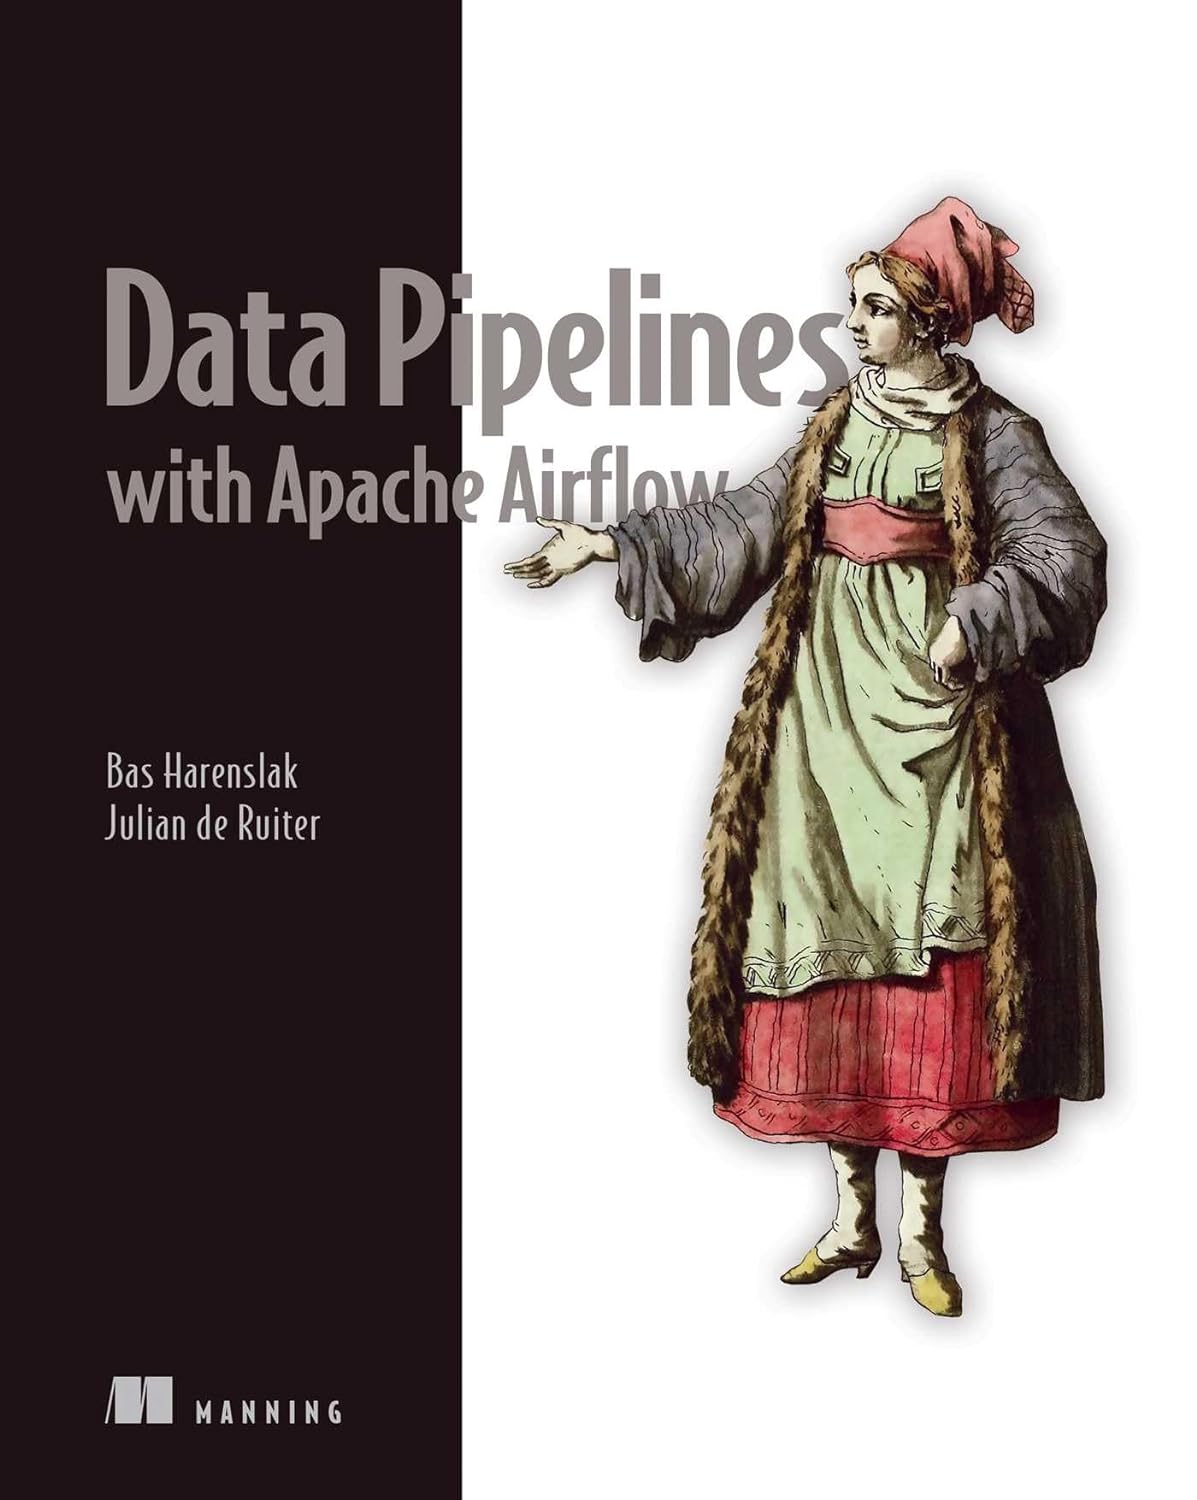 Build Data Pipeline with Apache Airflow